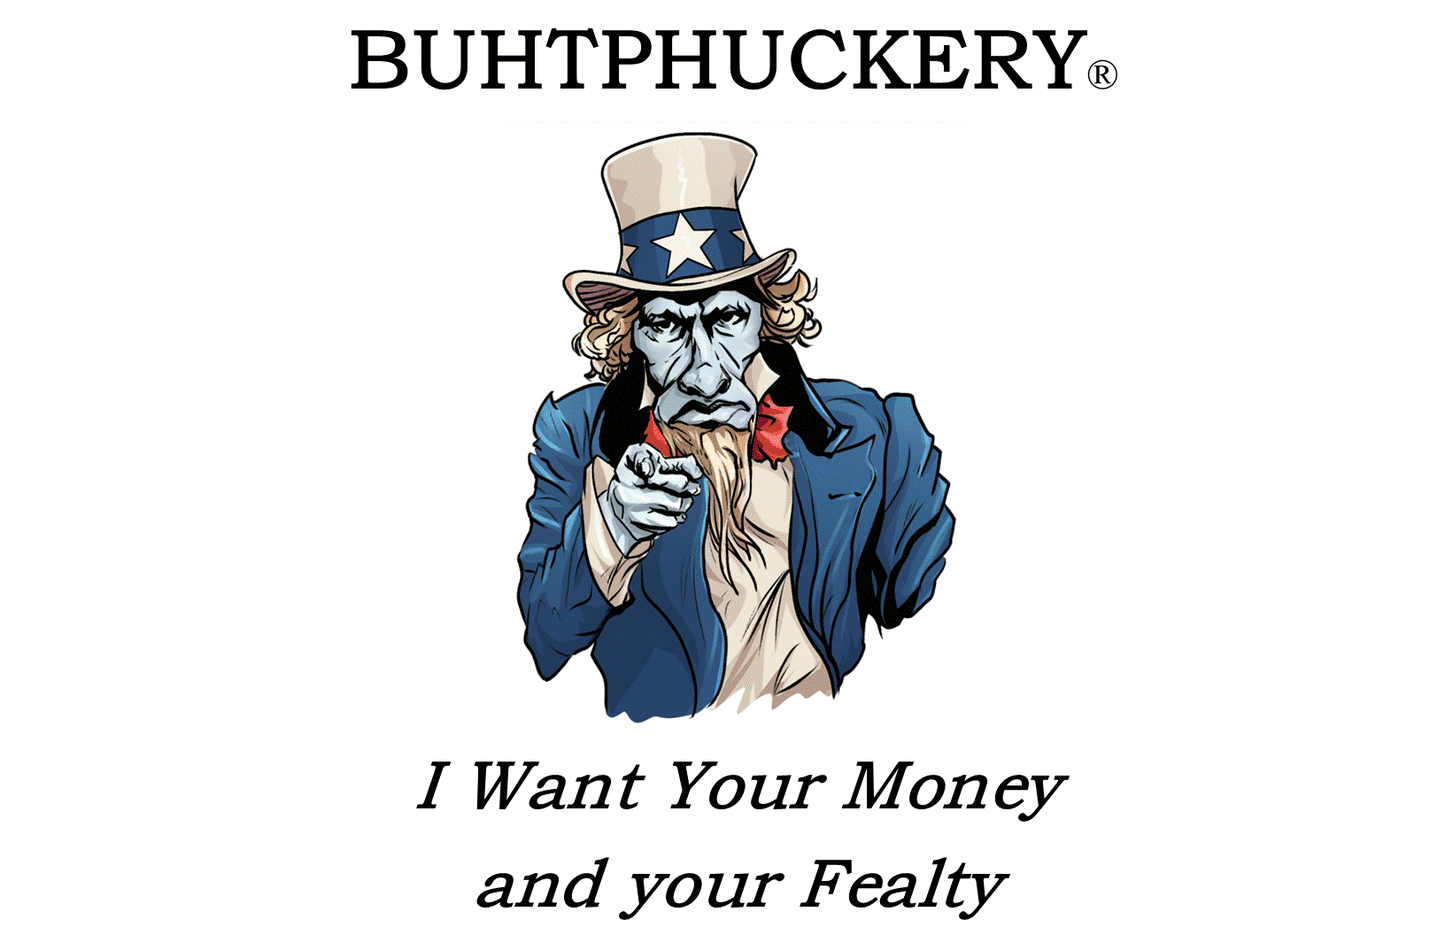 UNCLE SCAM: Funny Political Large Graphic T-Shirt - BUHTPHUCKERY